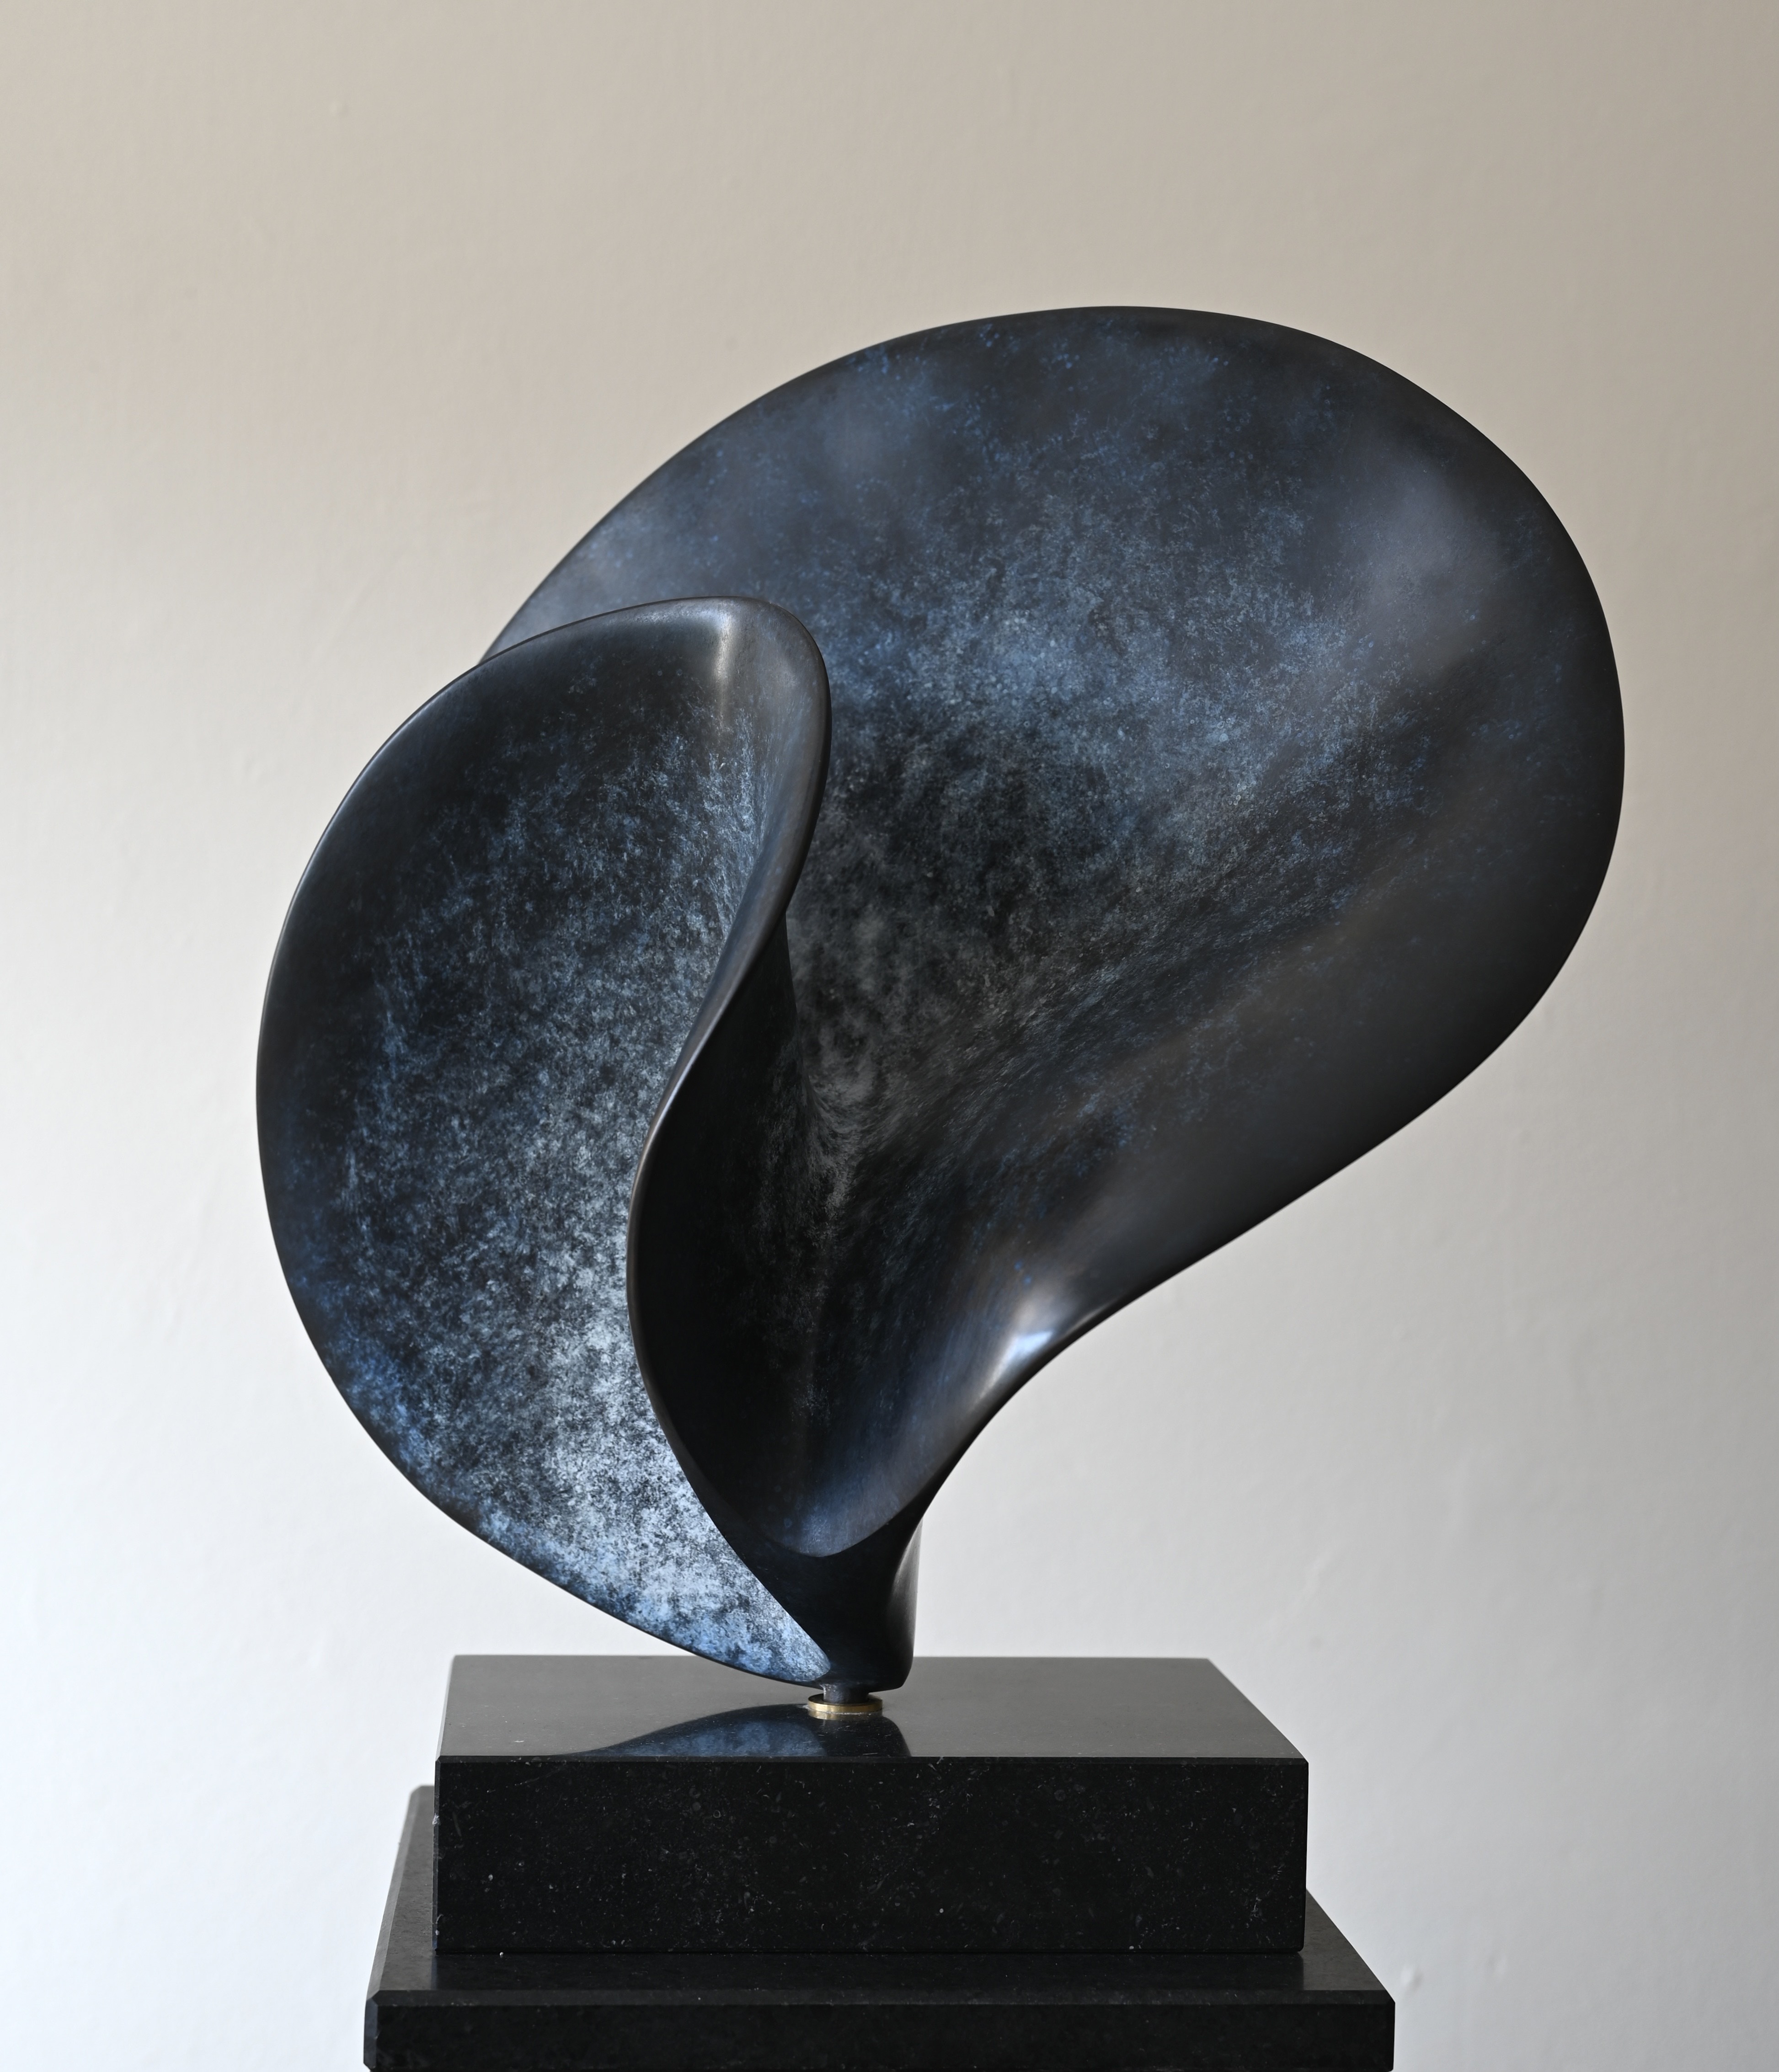 art gallery, commissioned art, bronze, sculpture, interior styling,